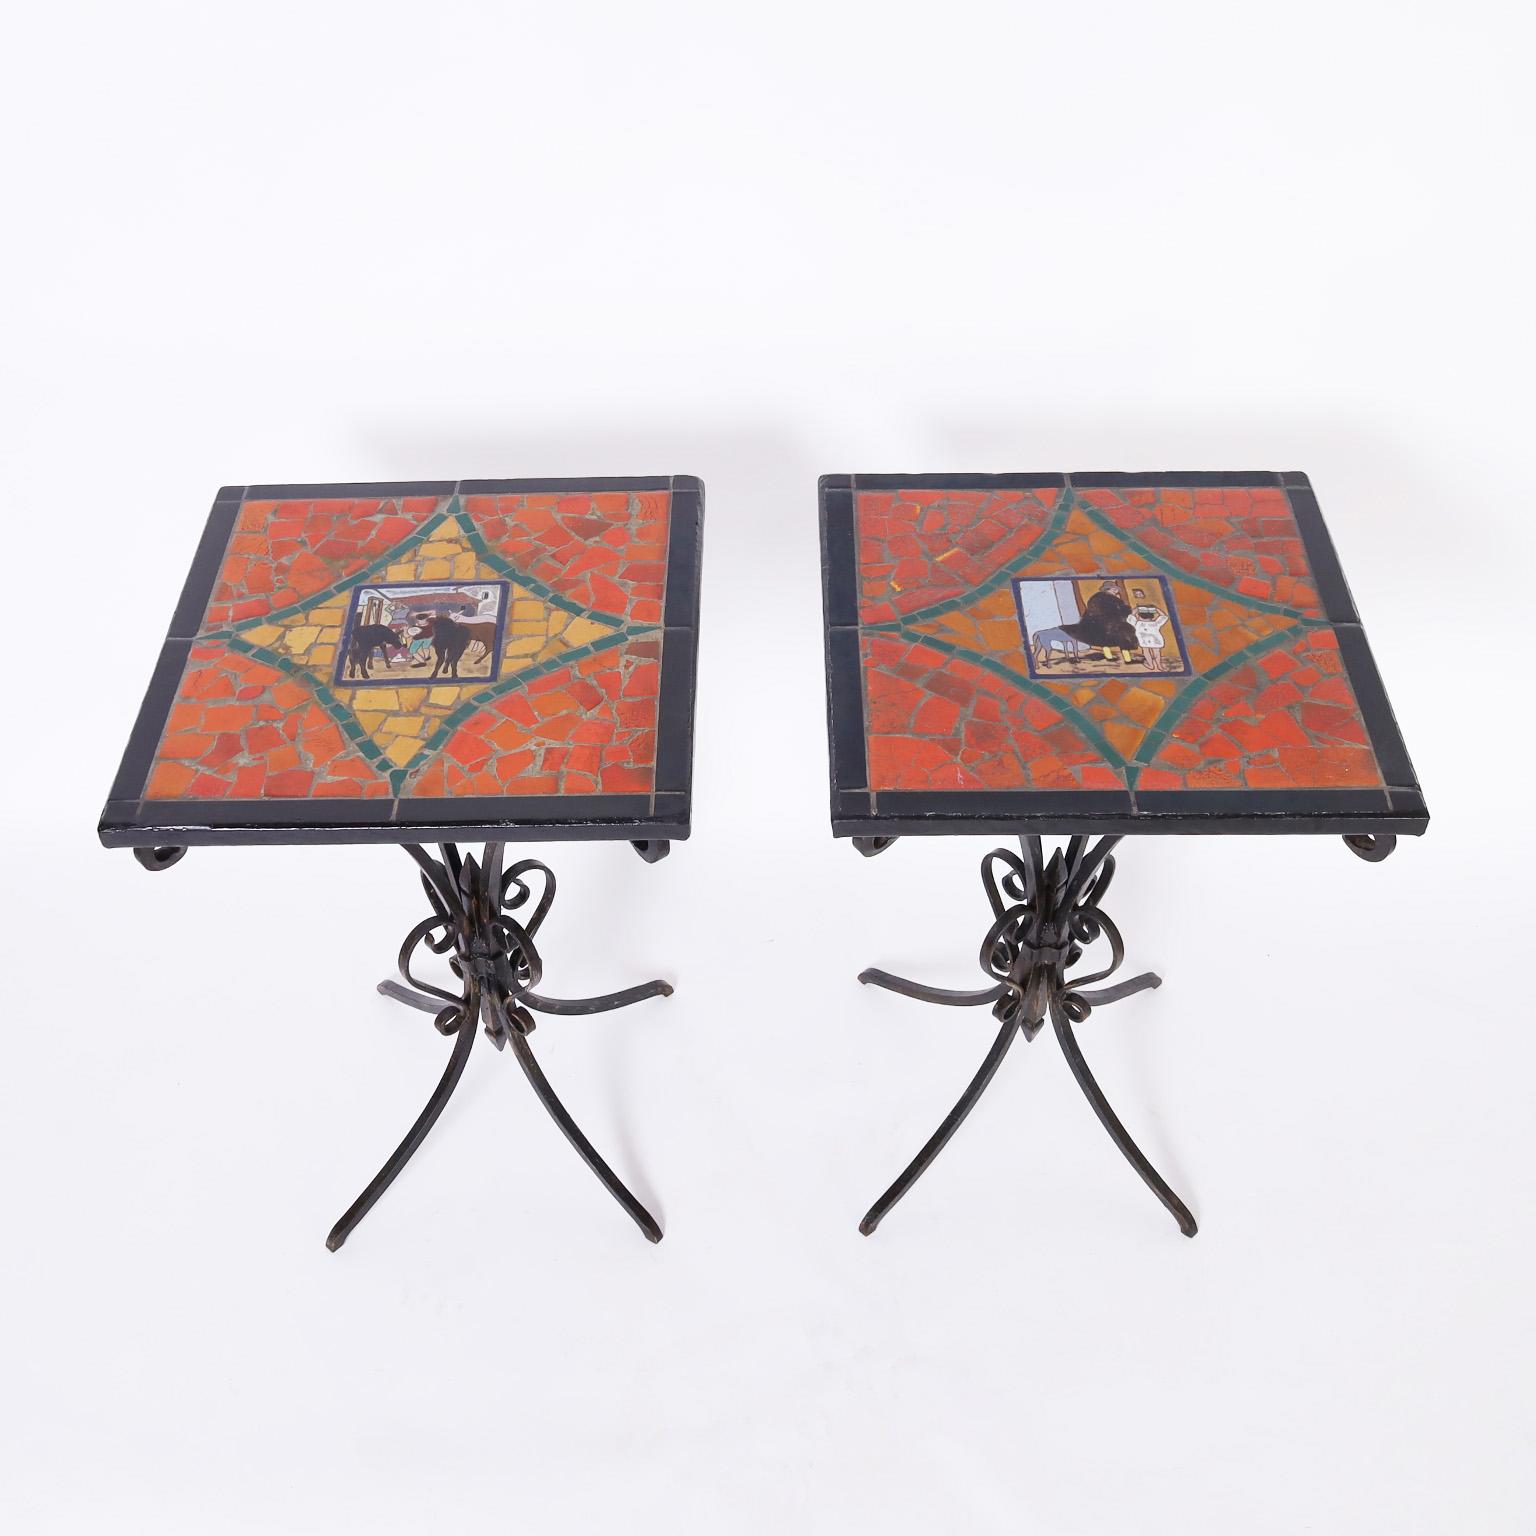 French Provincial Pair of Antique French Tile Top Iron Tables For Sale